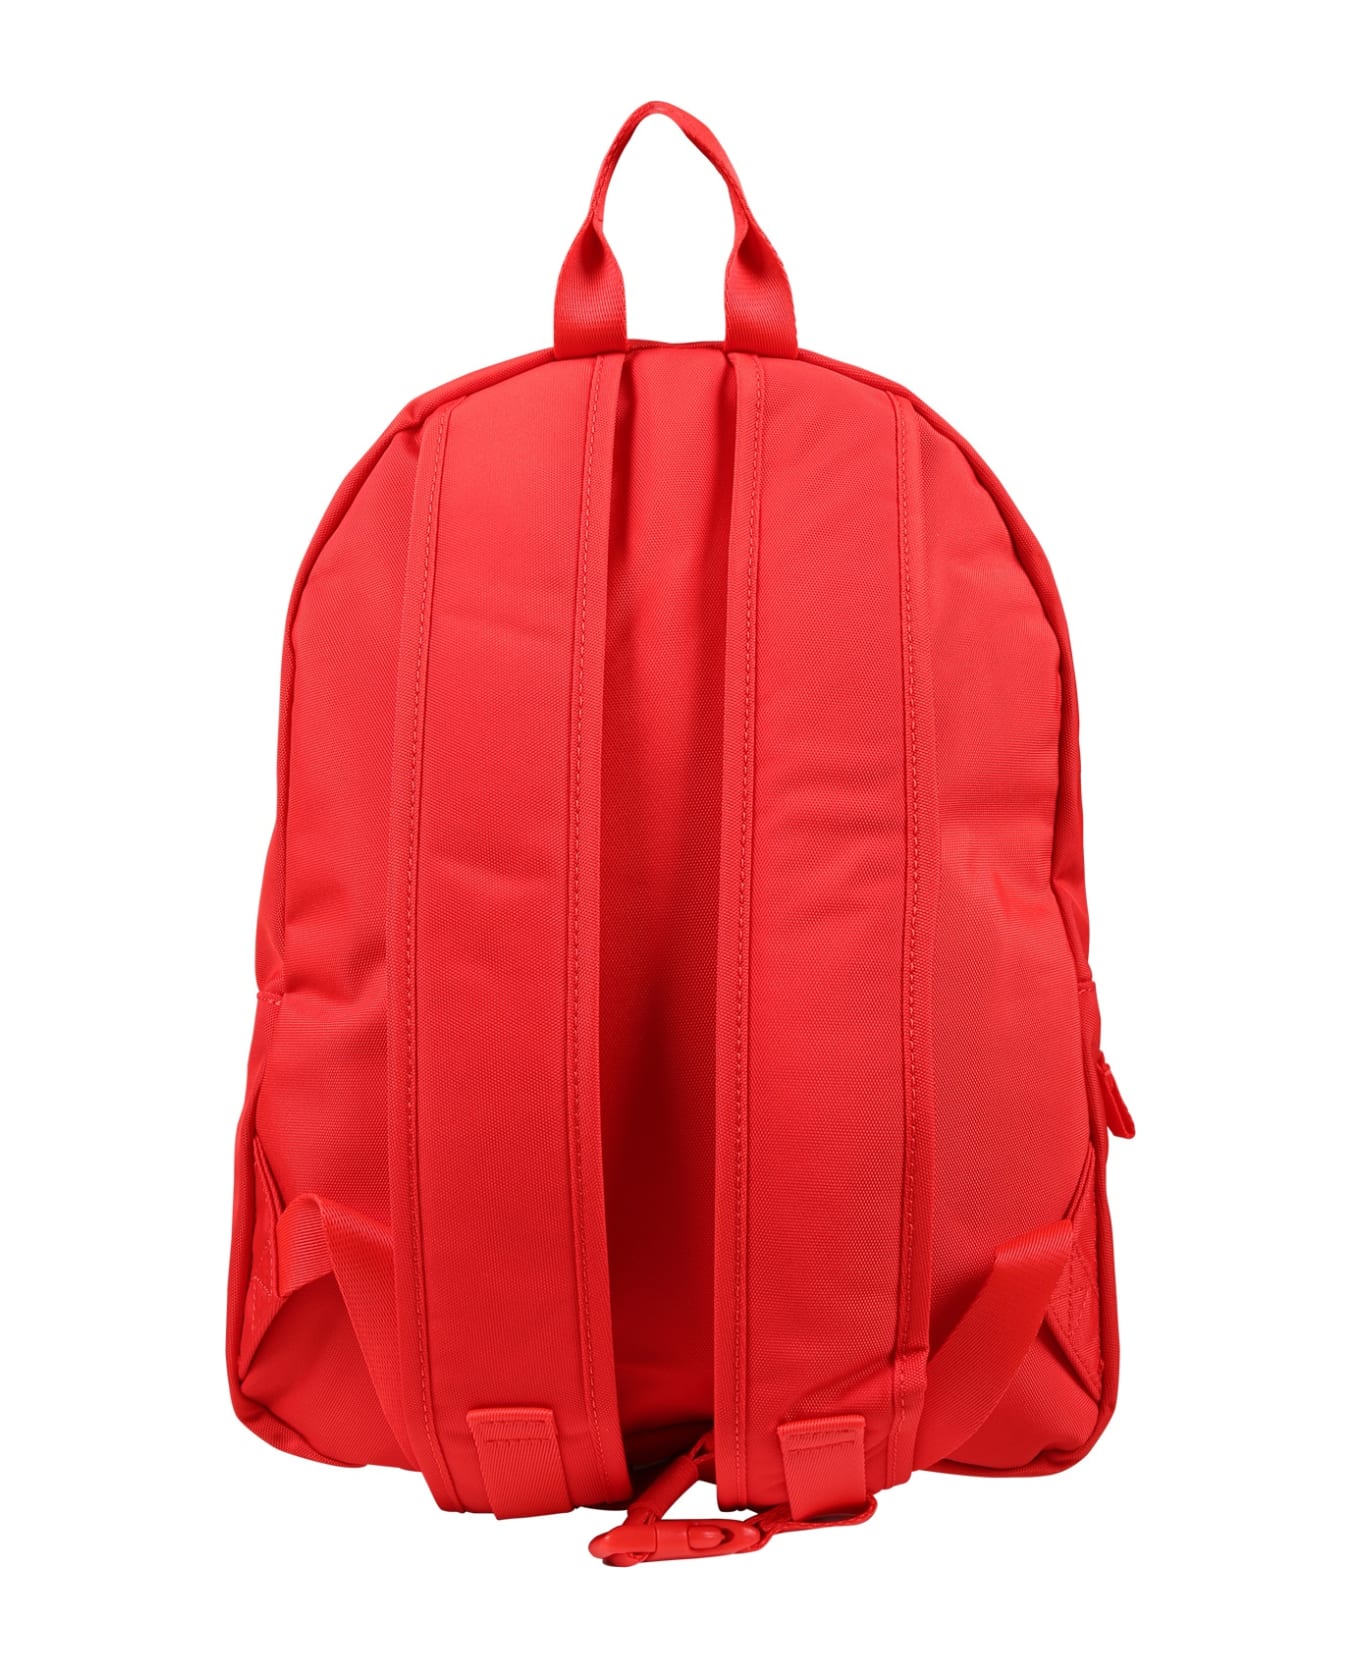 Tommy Hilfiger Red Backpack For Kids With Logo - Red